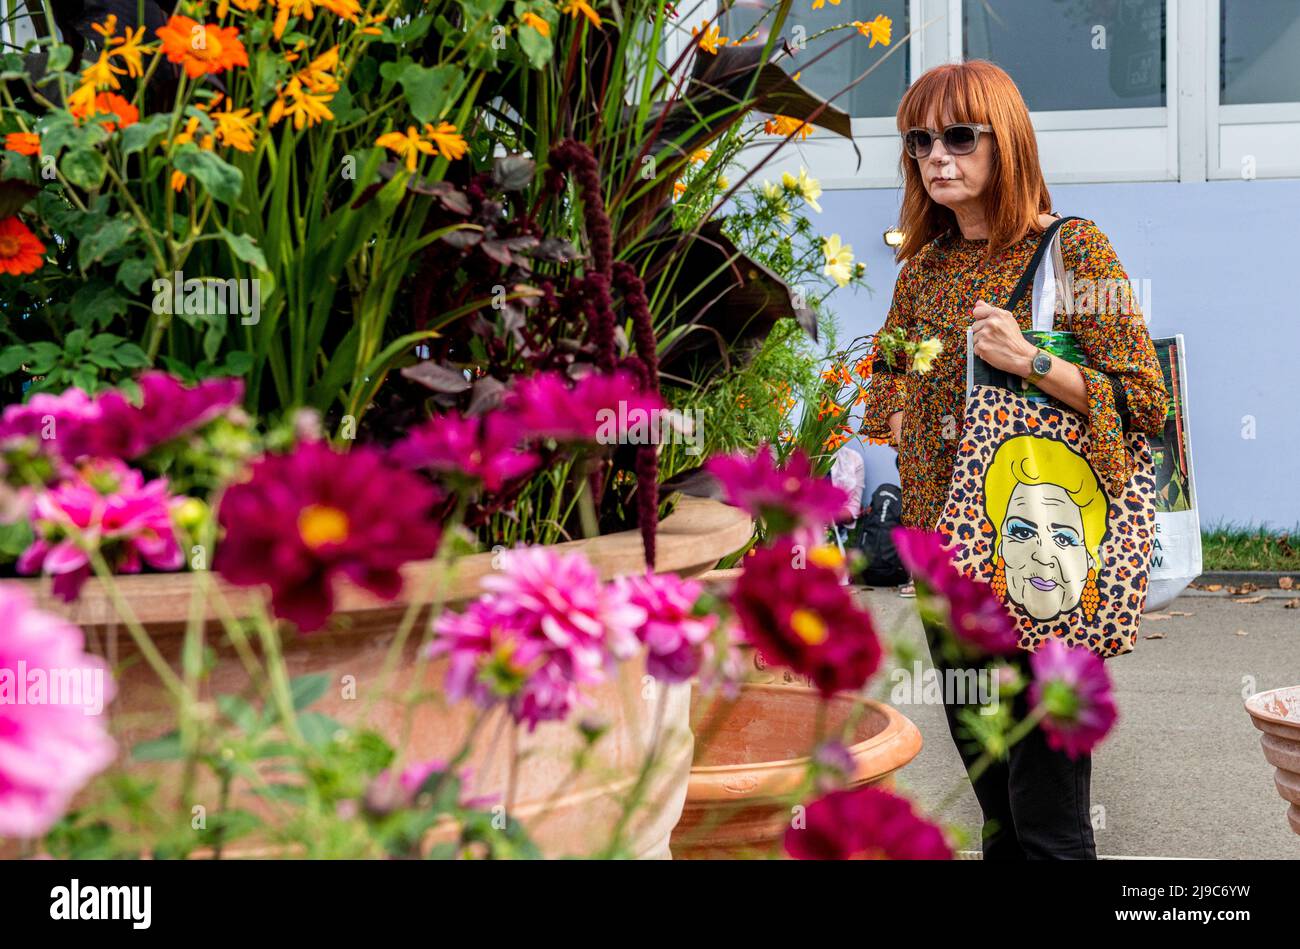 A woman wearing a floral pattern top and carrying a colourful printed bag passes on front of a big flower arrangement on the last day of the RHS Chelsea Flower Show. Stock Photo